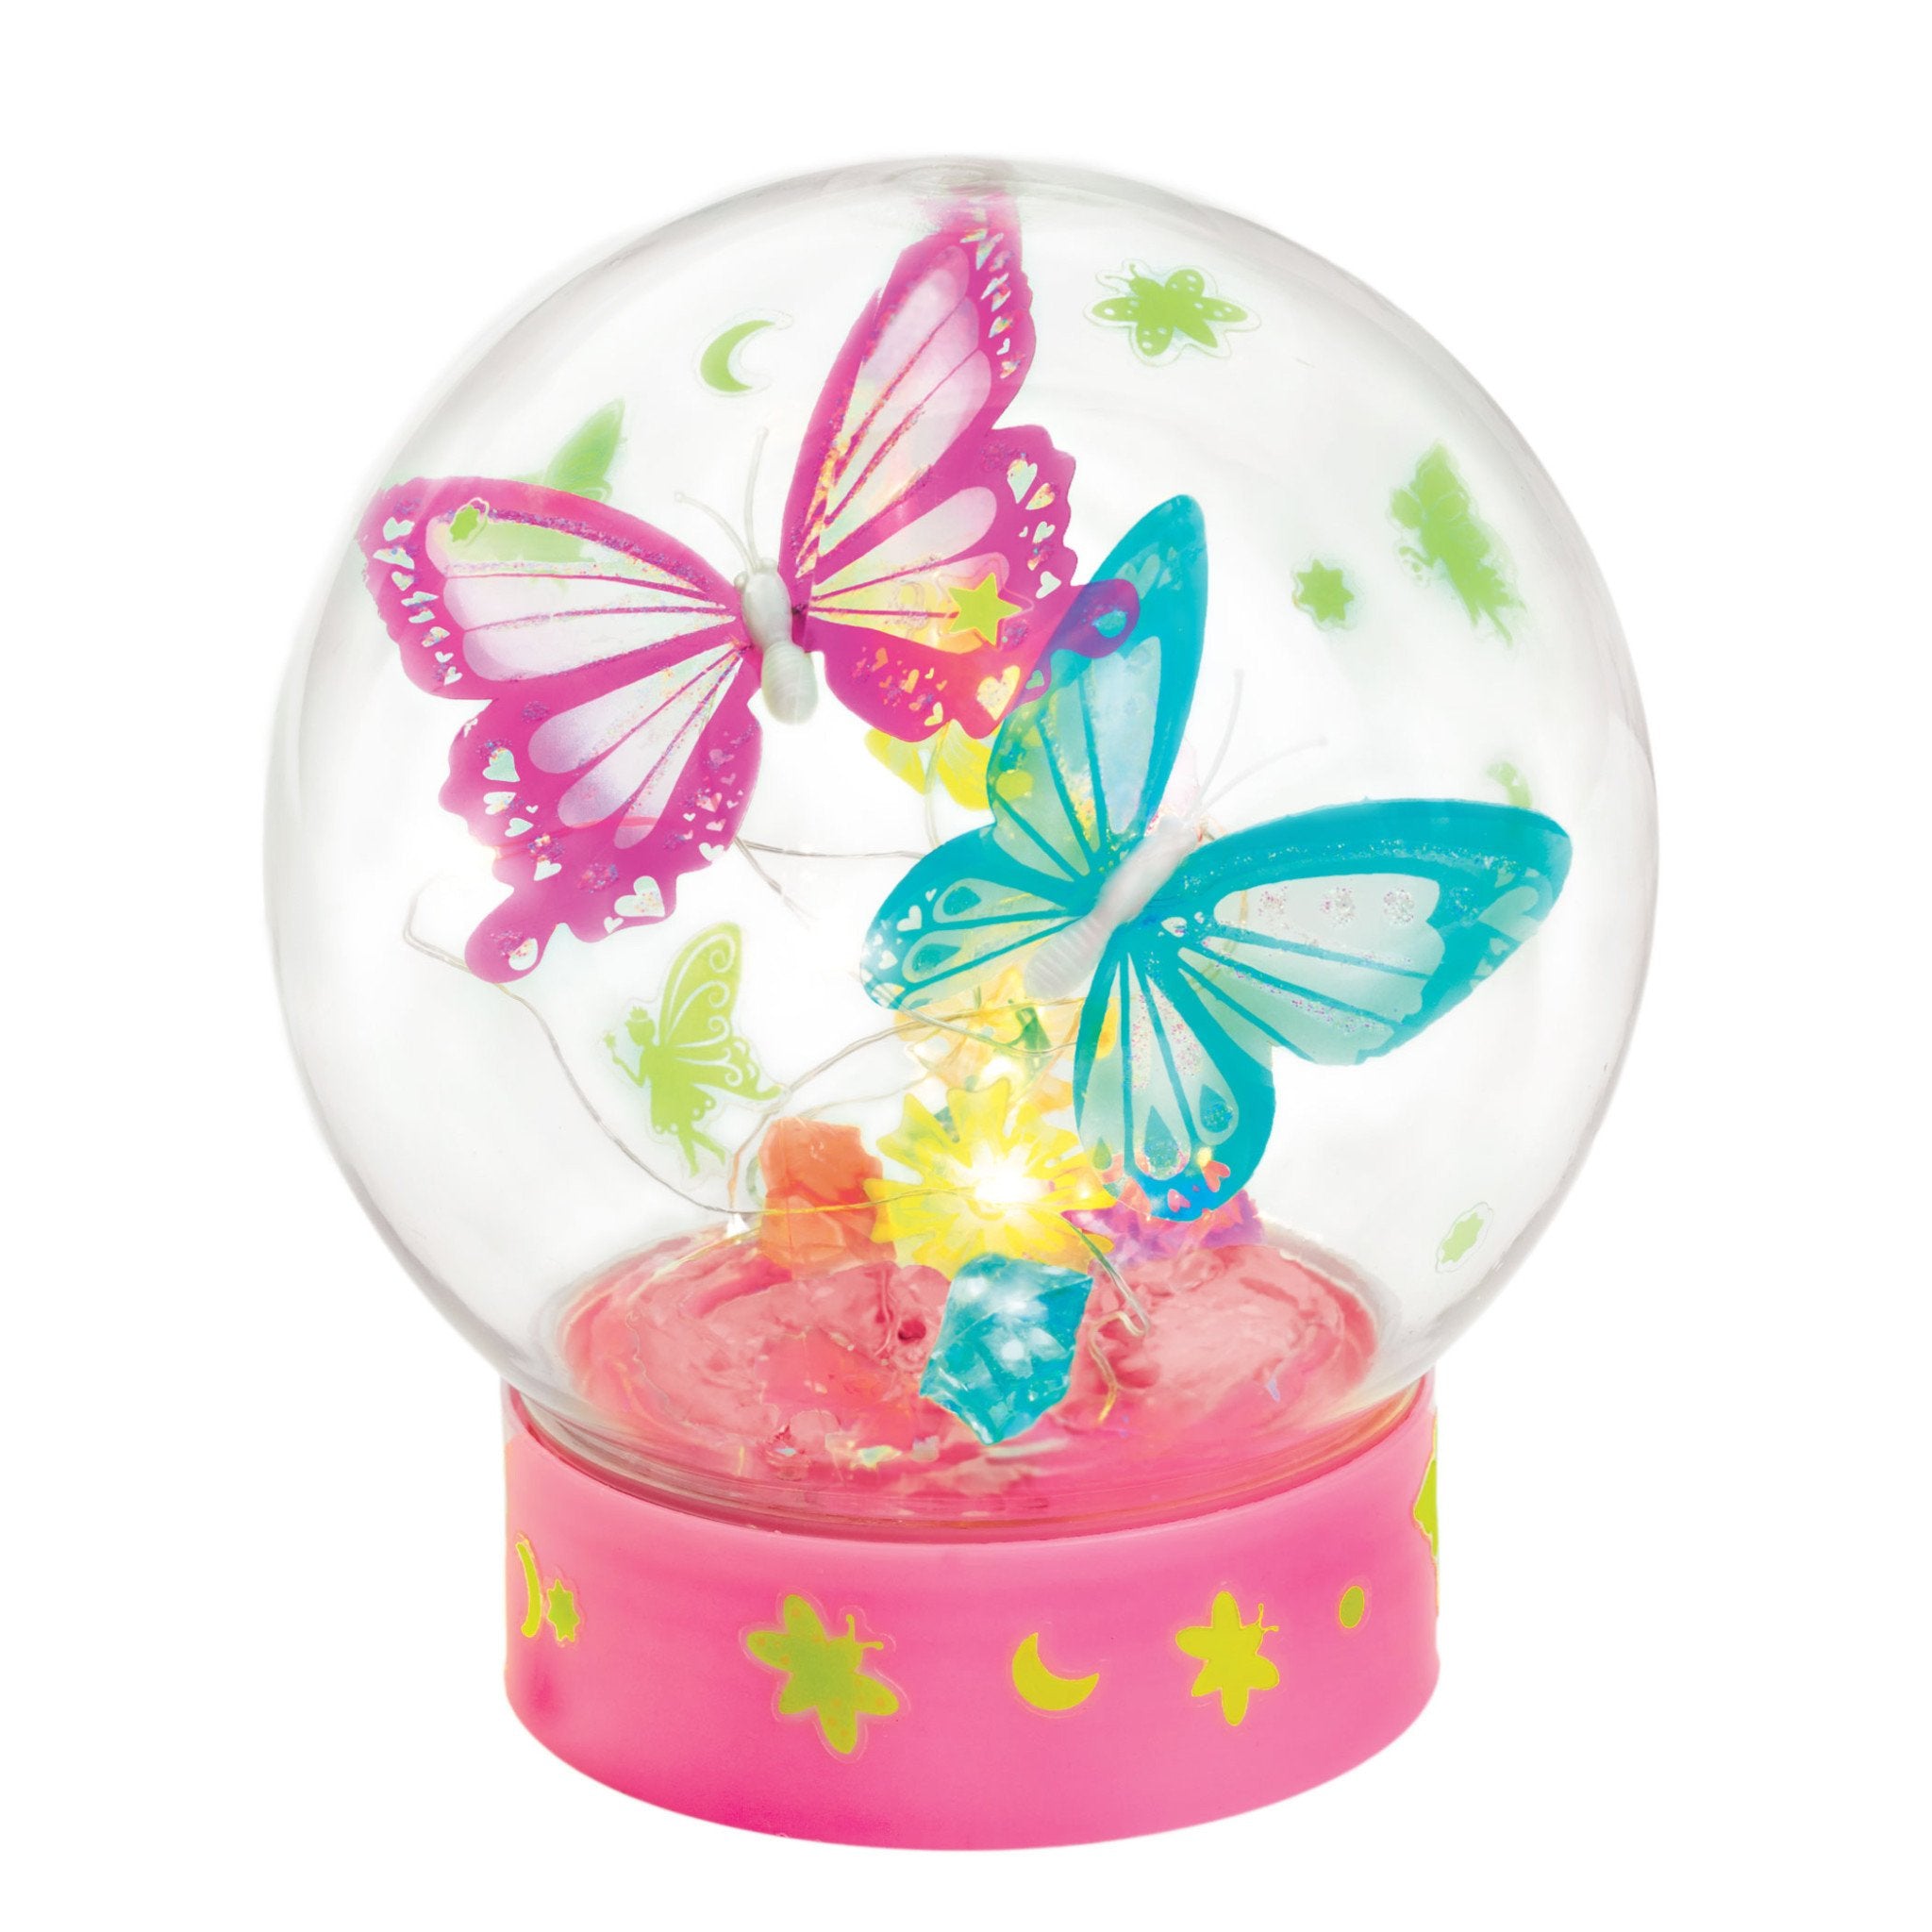 Butterfly Fairy Lights by Faber-Castell #6212000